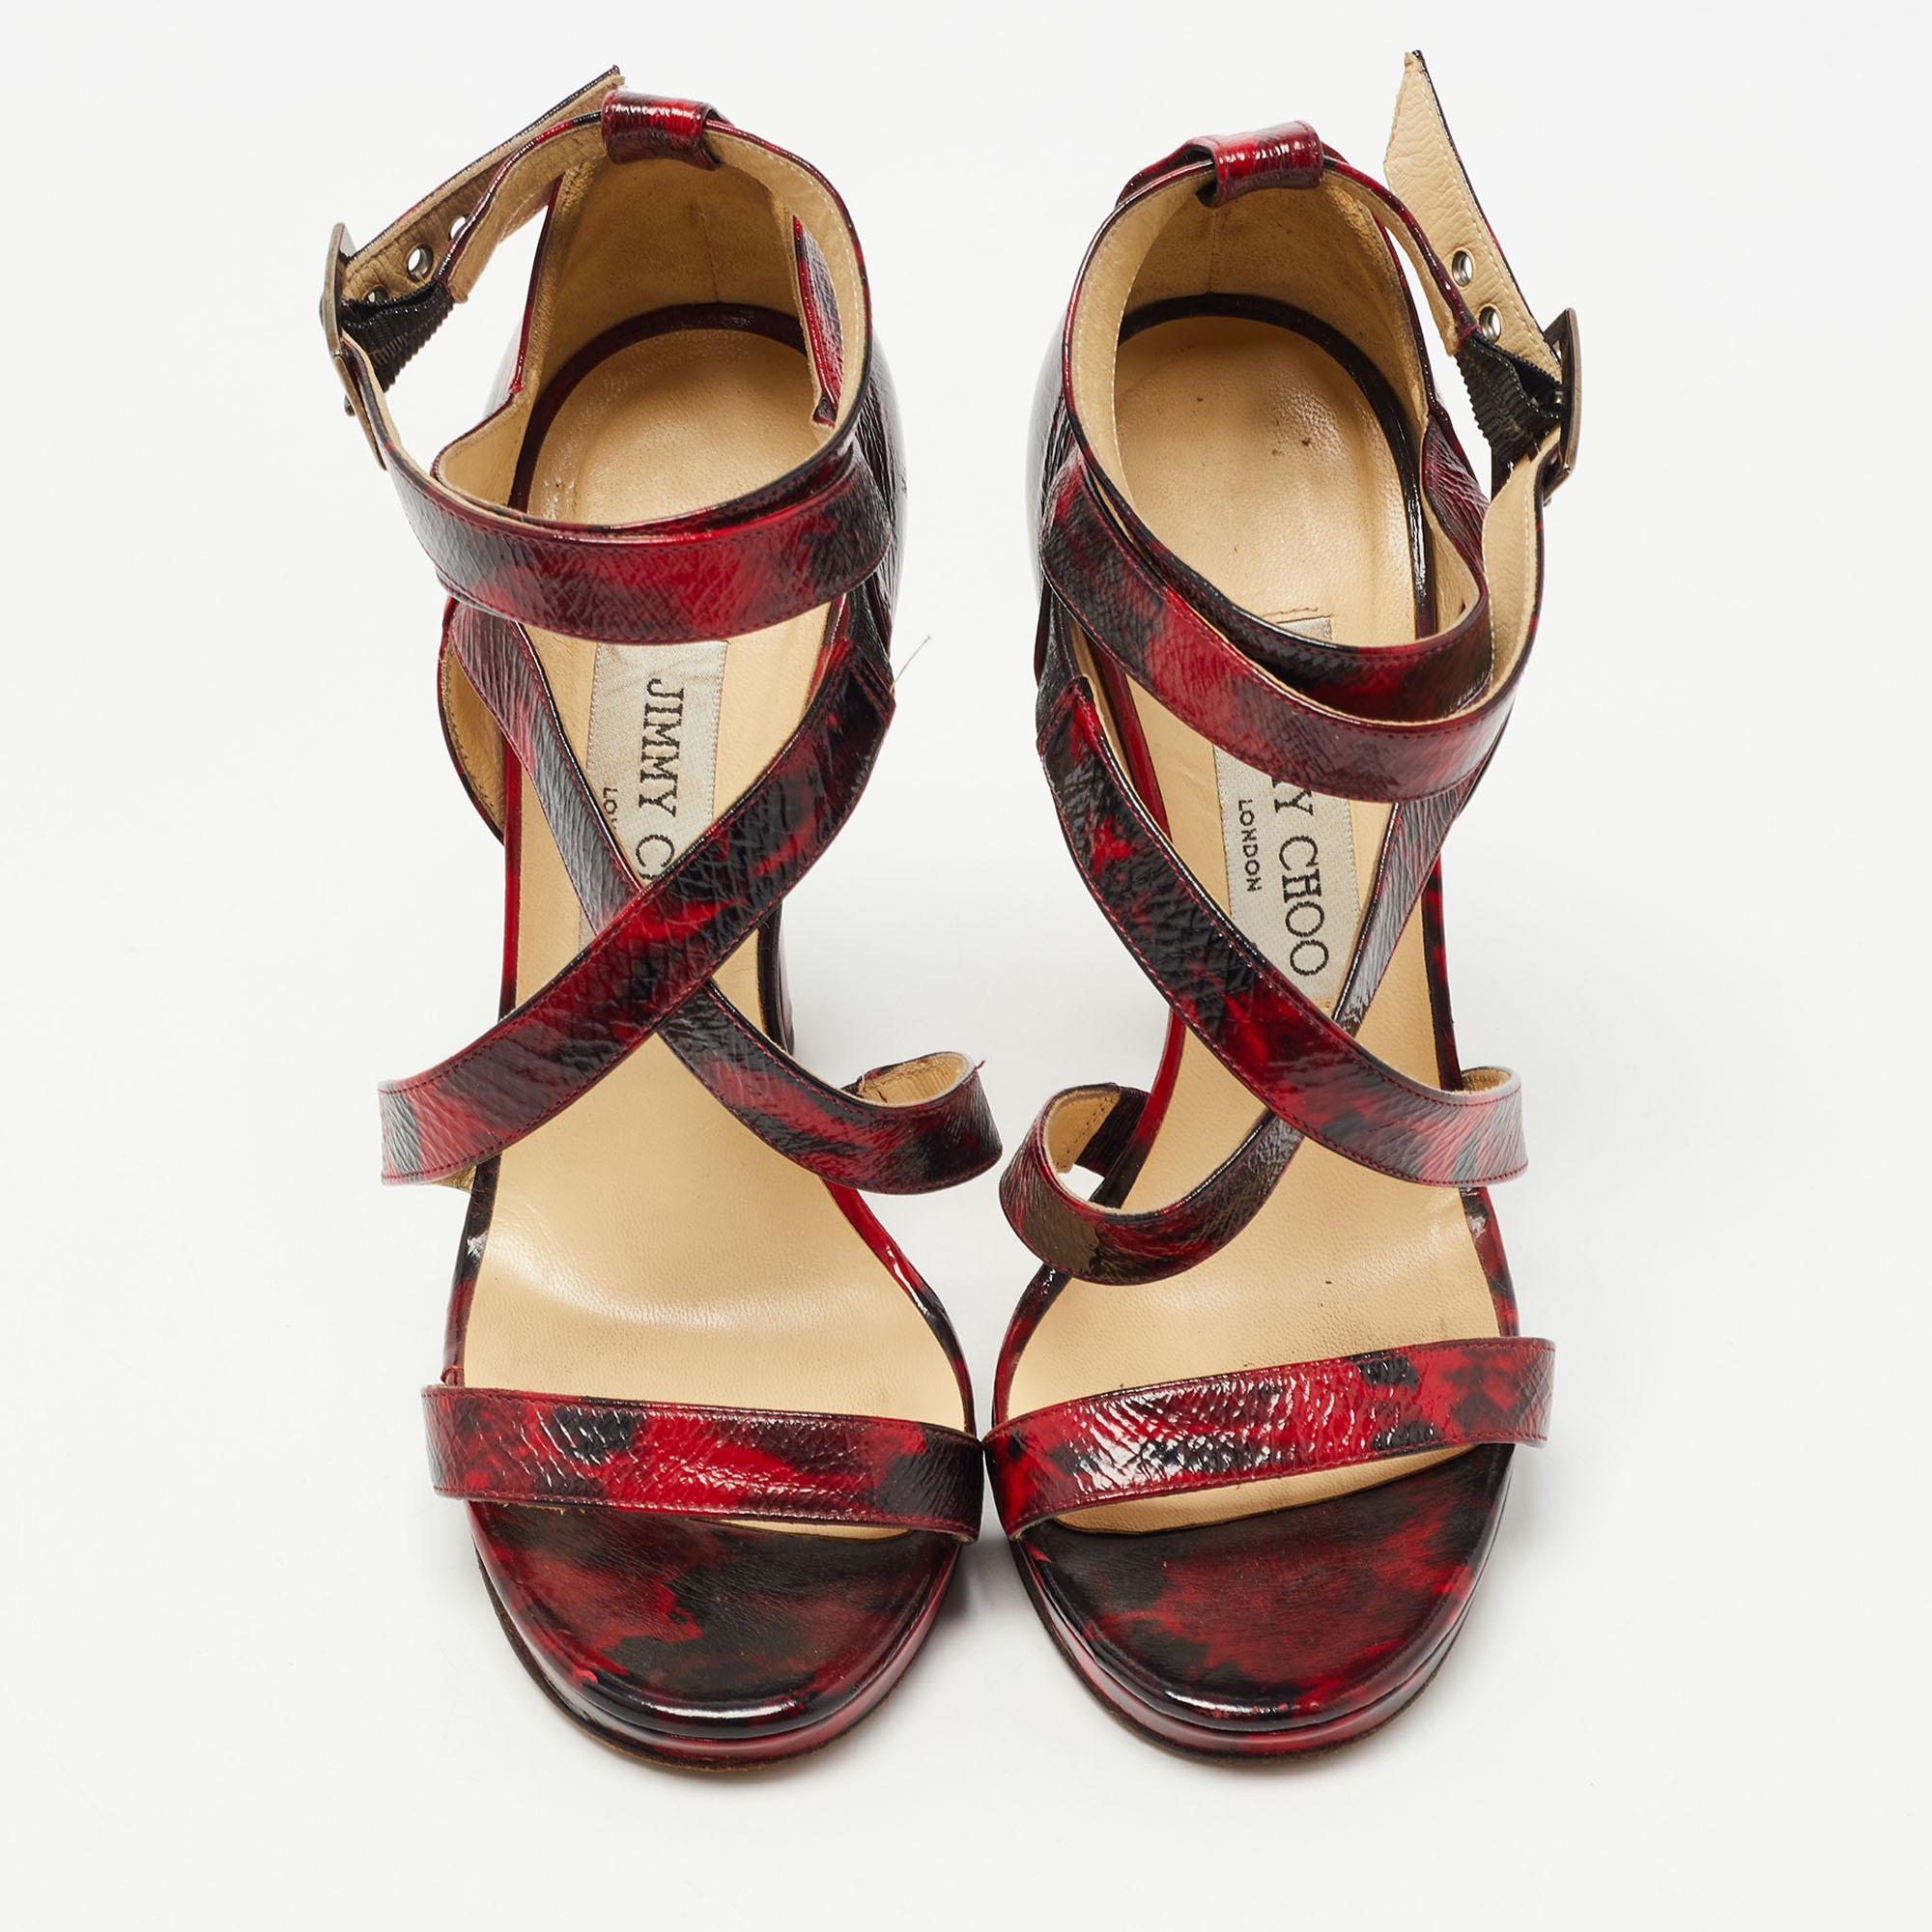 Jimmy Choo Red/Black Leather Double Cross Strap Sandals Size 36